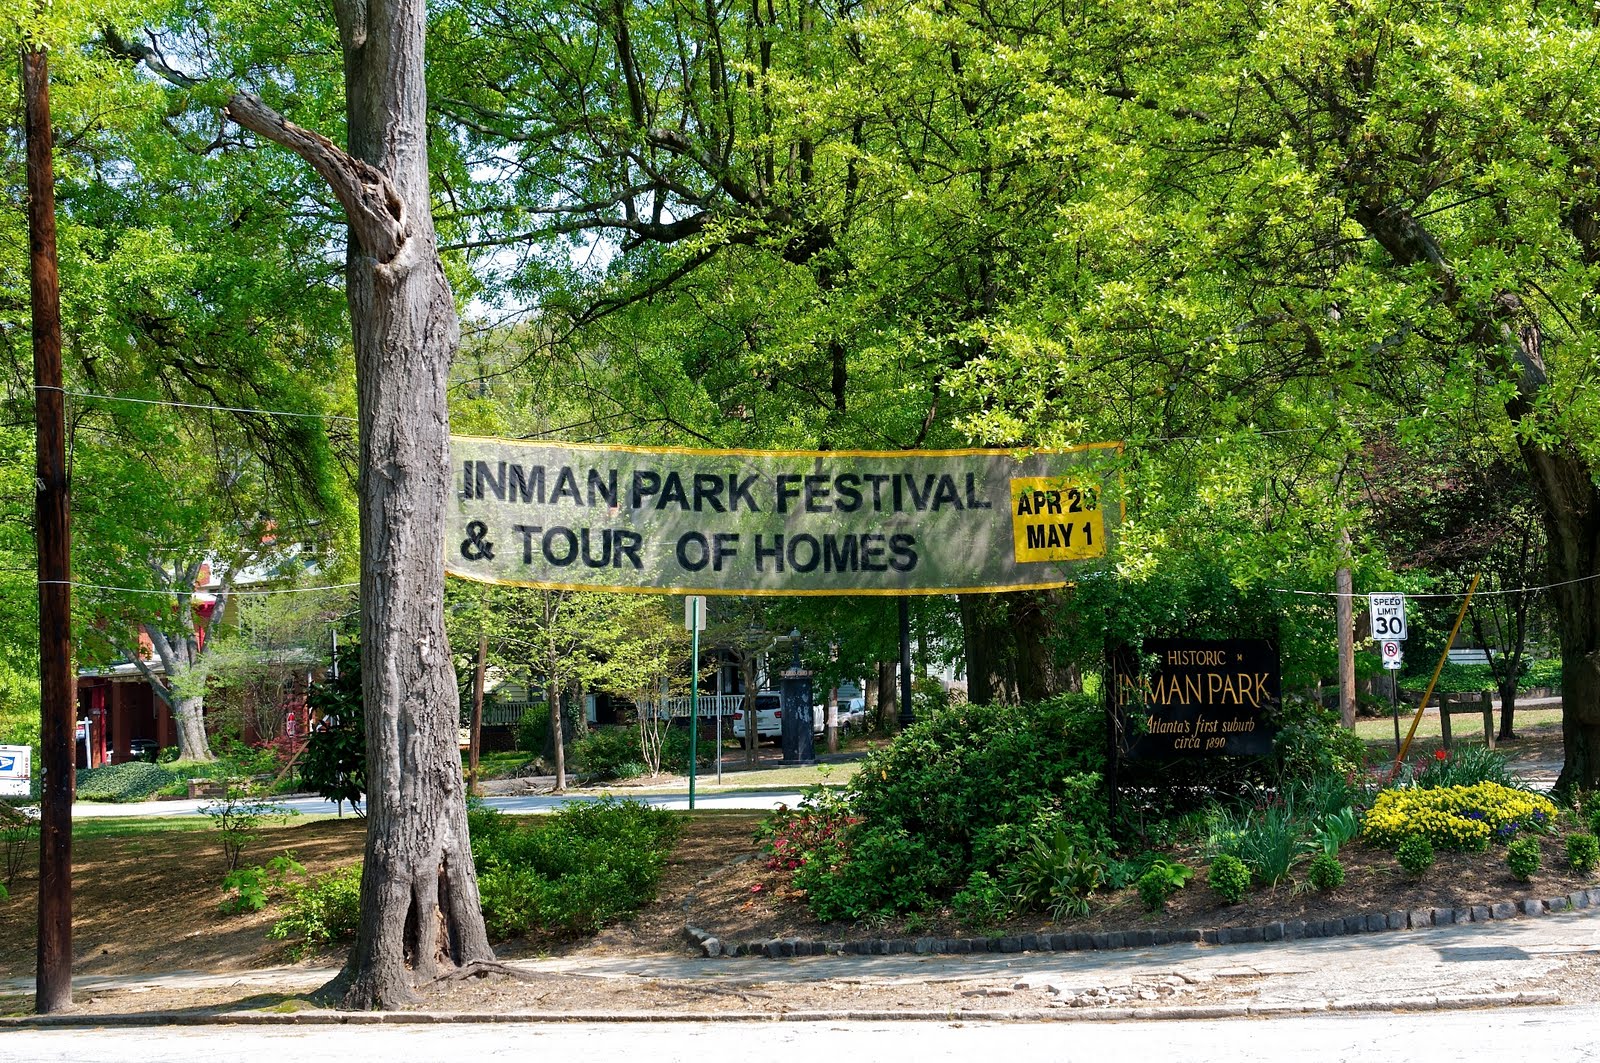 Historic Inman Park Inman Park The Festival is Coming!